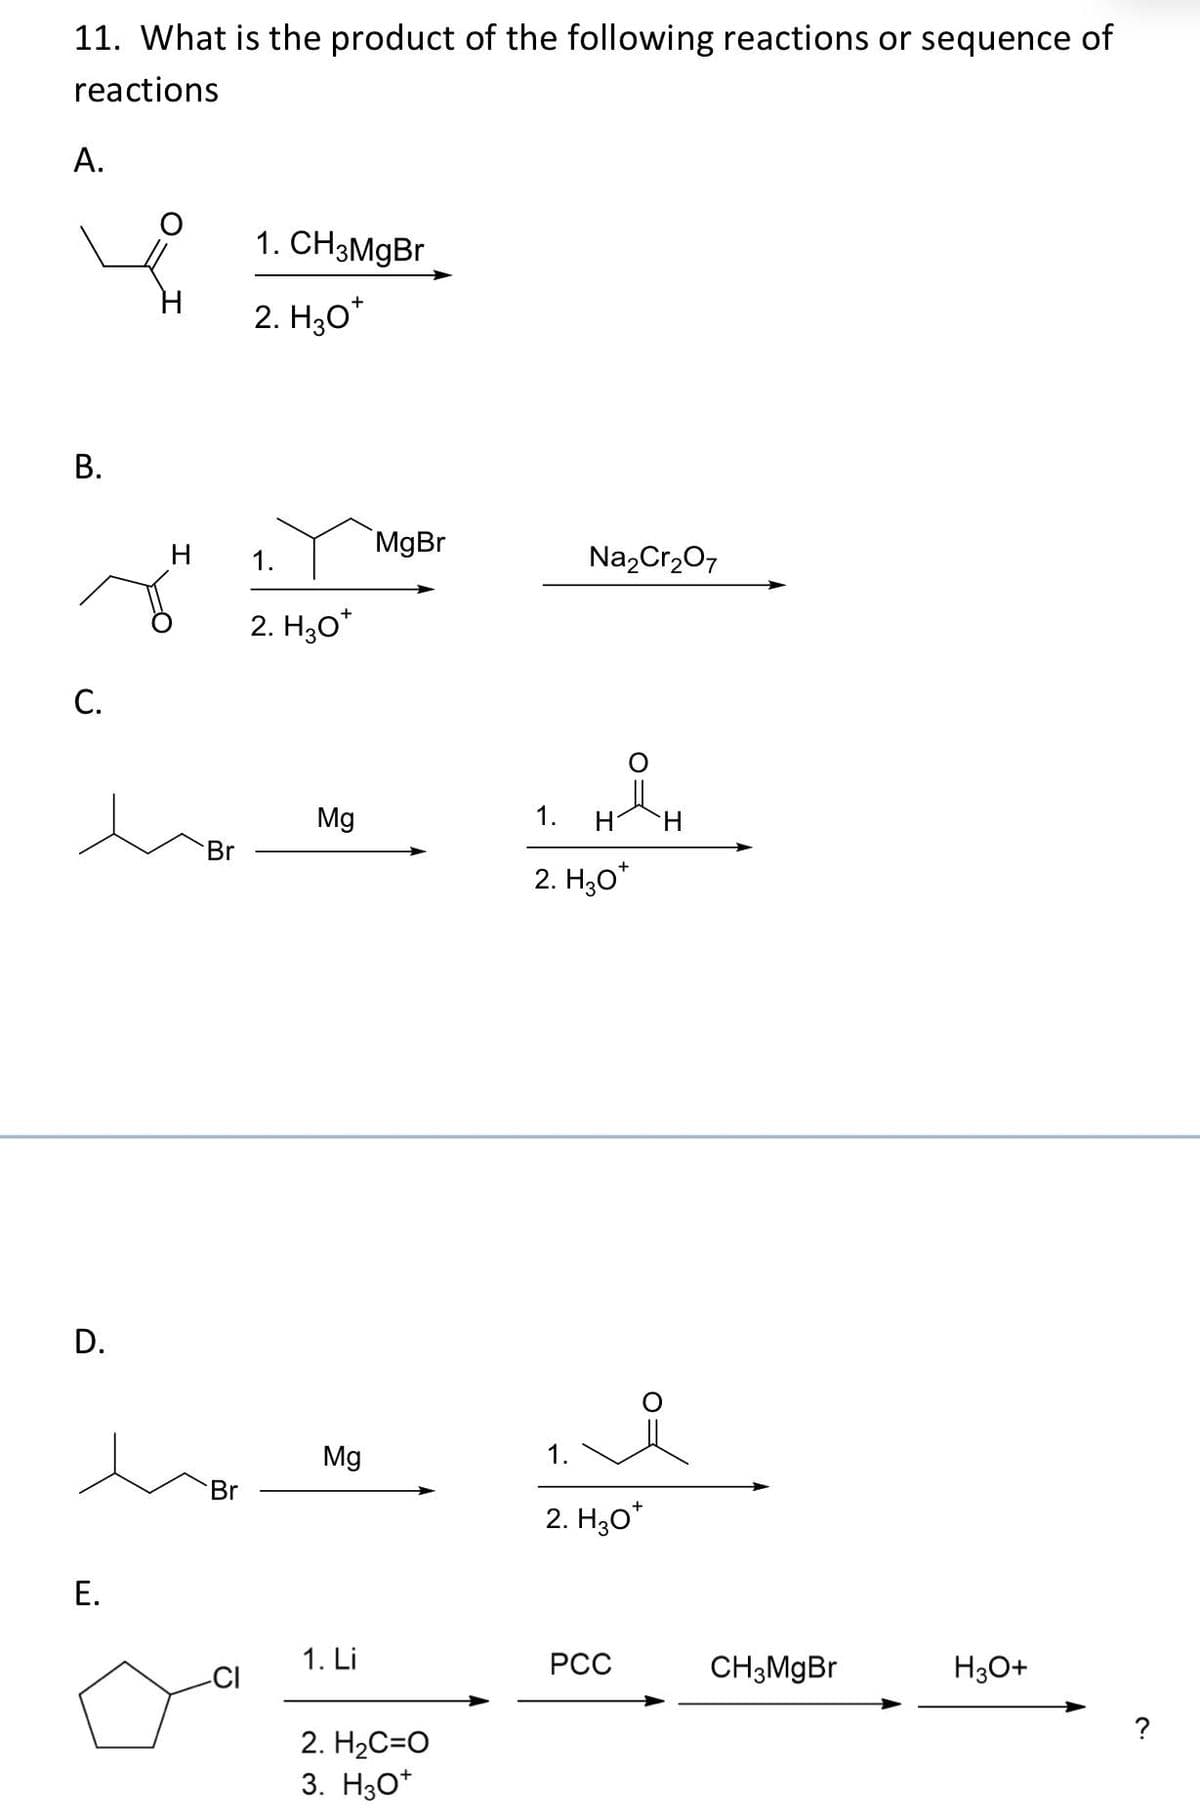 11. What is the product of the following reactions or sequence of
reactions
A.
B.
C.
D.
E.
Br
1. CH3MgBr
H 1.
Br
+
2. H30*
2. H₂O*
Mg
Mg
1. Li
MgBr
2. H₂C=O
3. H3O+
Na₂Cr₂O7
ĐẢ
1.
H
2. H₂O*
1.
H
i
2. H30*
PCC
CH3MgBr
H3O+
?